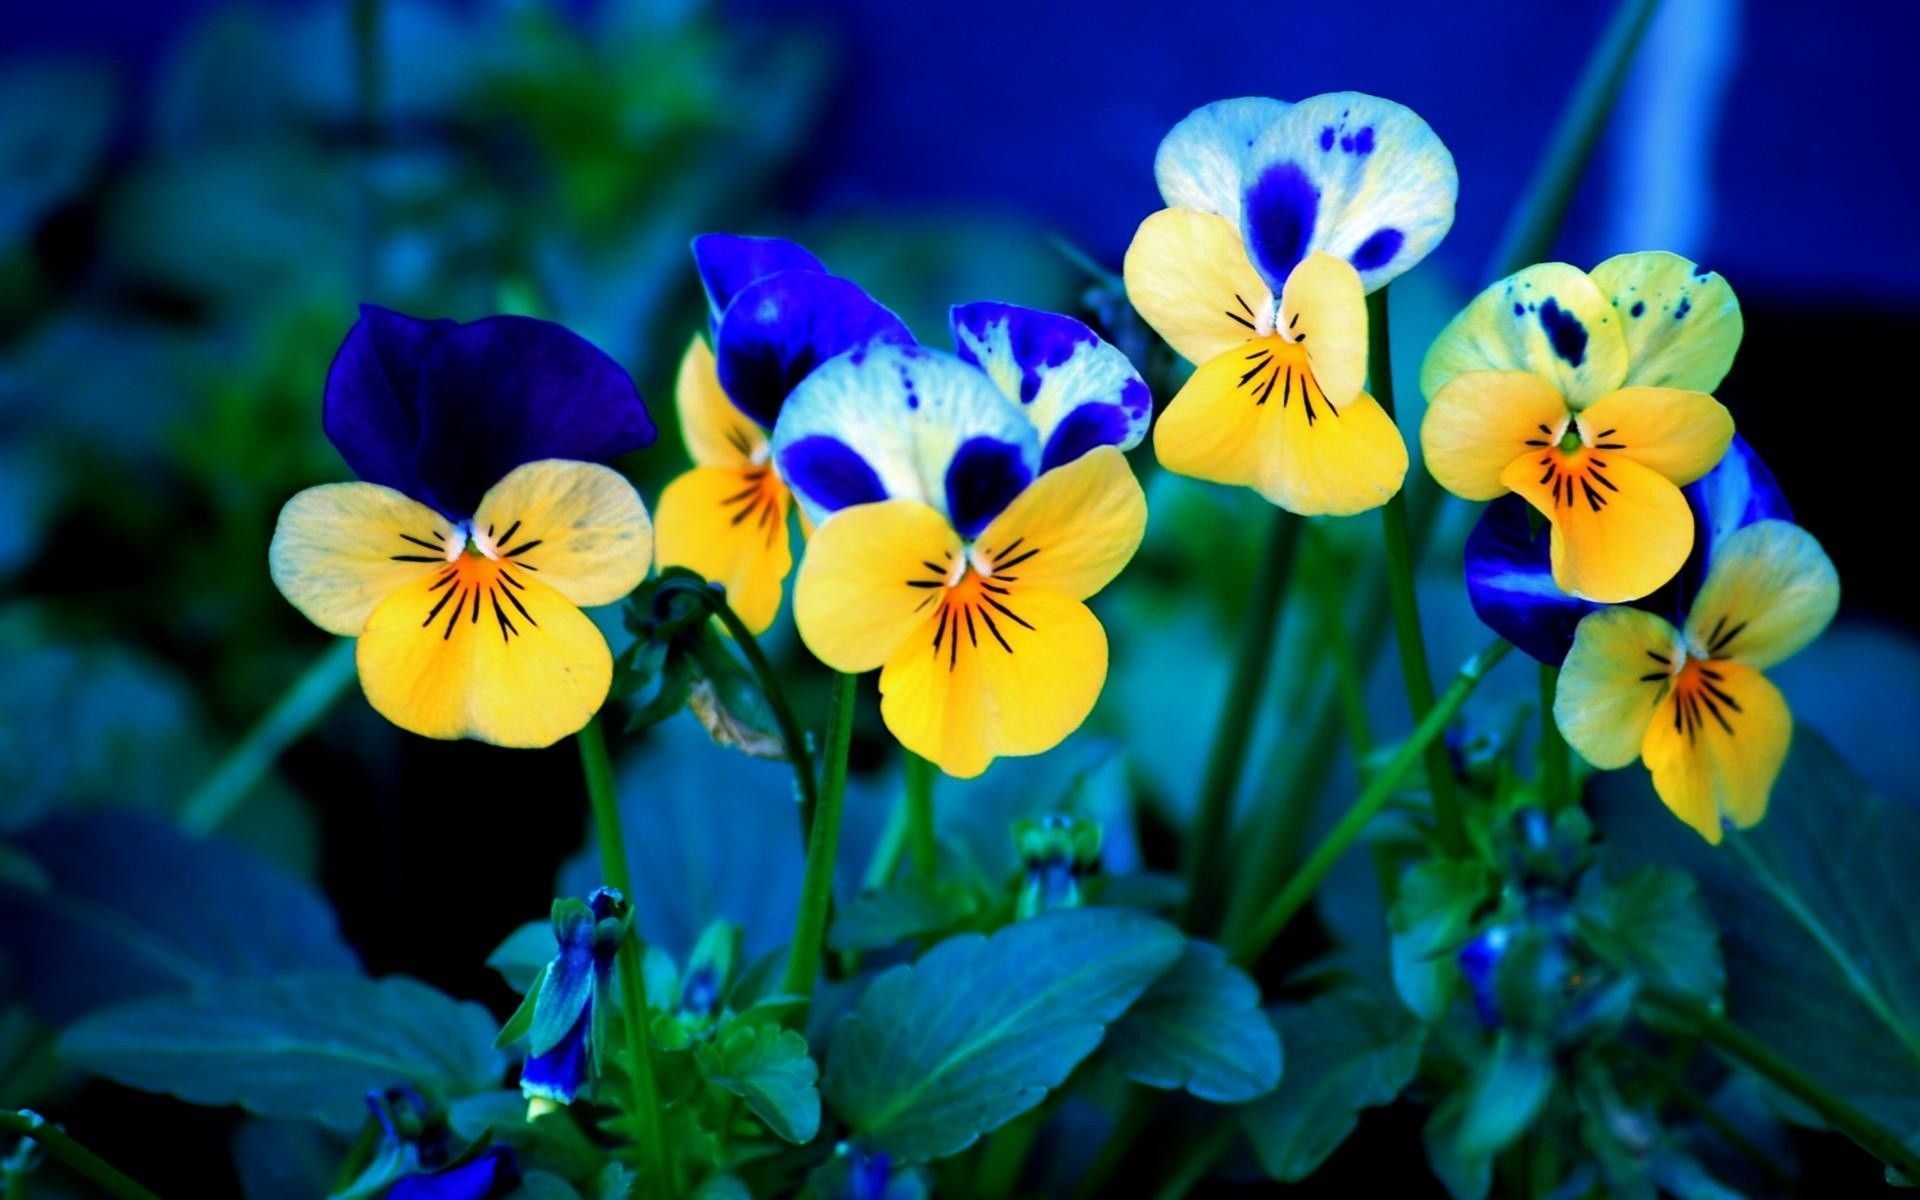 Spring Flowers wallpapers | Spring Flowers stock photos